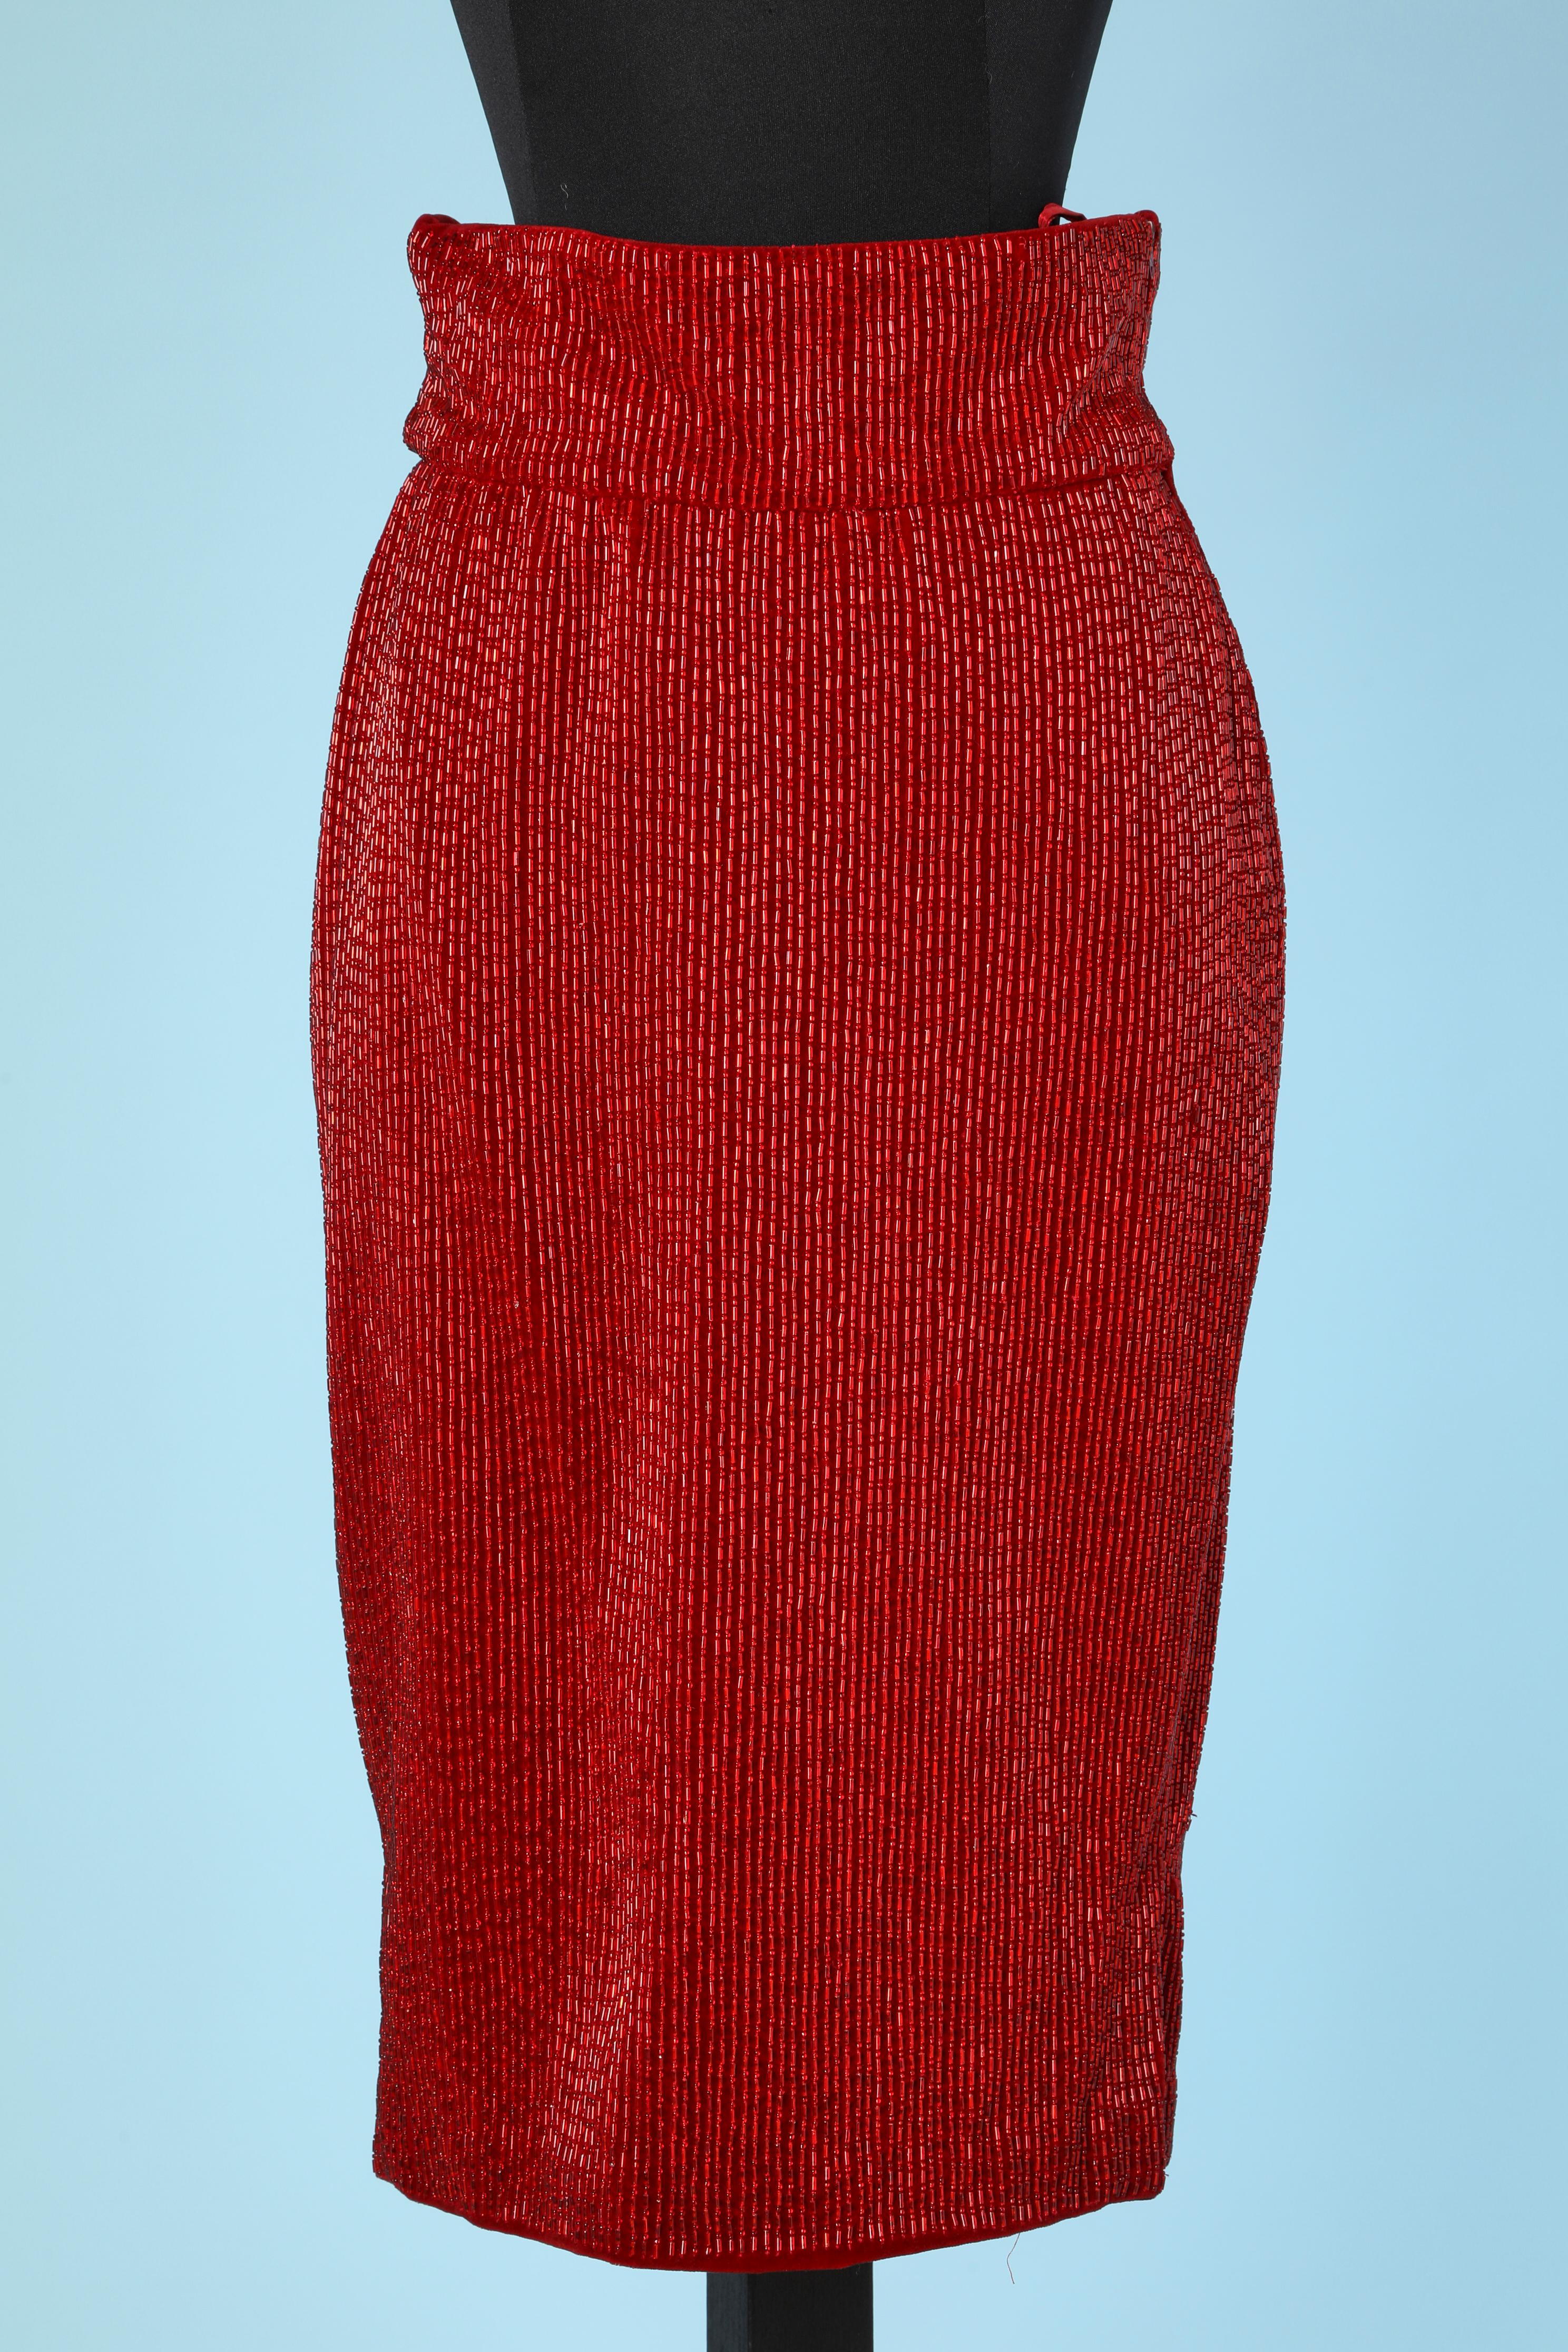 Red Beaded evening skirt Gianni Versace Sera In Excellent Condition For Sale In Saint-Ouen-Sur-Seine, FR